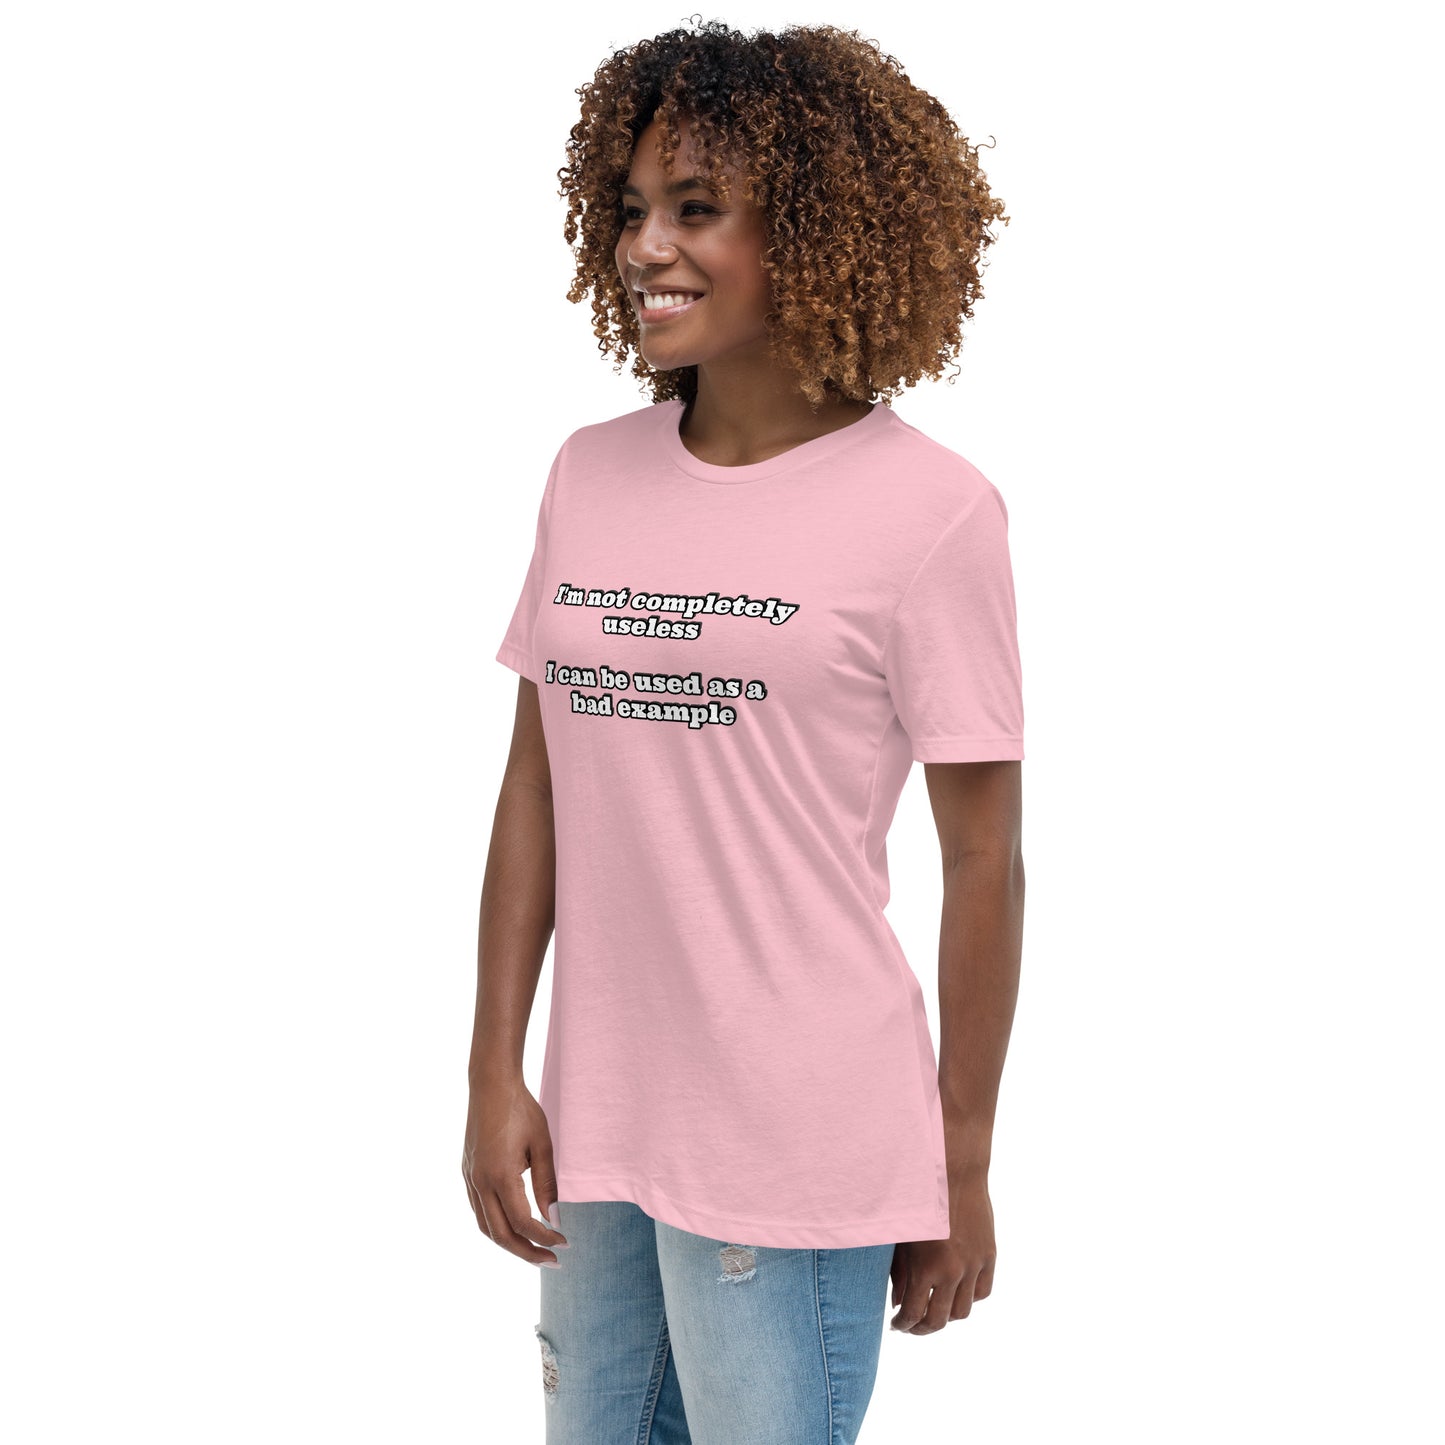 Women with pink t-shirt with text “I'm not completely useless I can be used as a bad example”